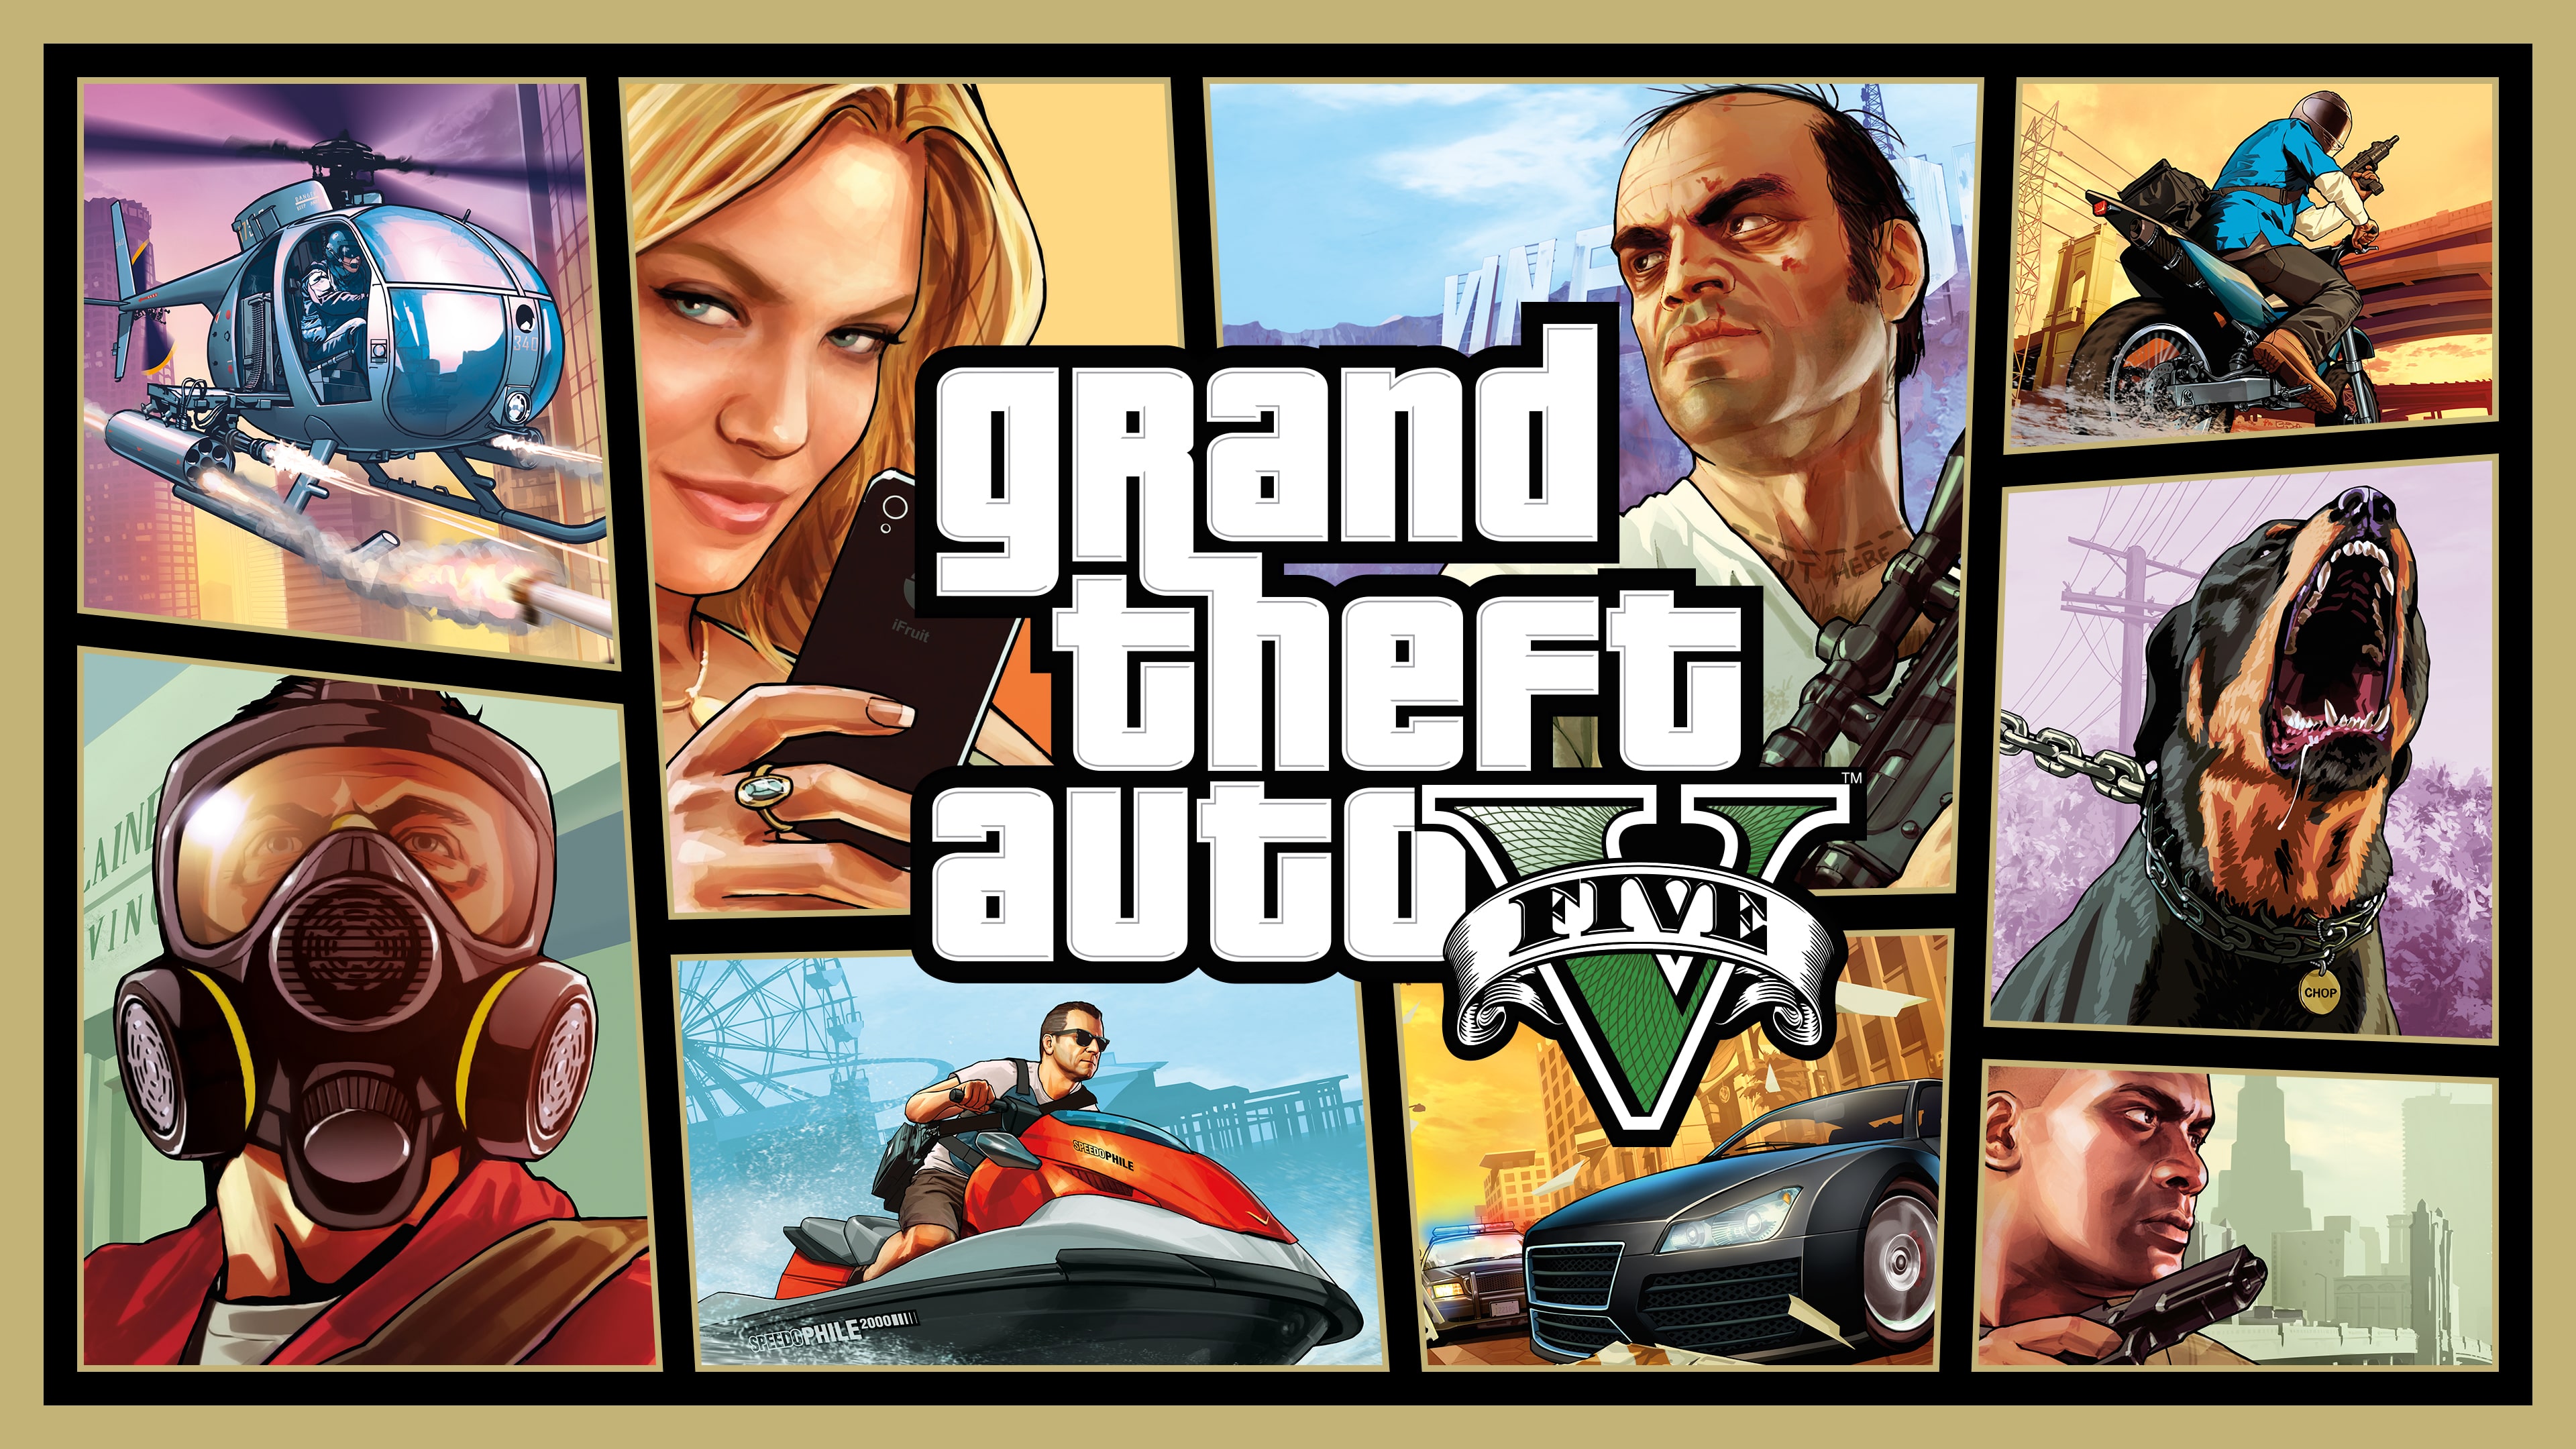 Grand Theft Auto V (PlayStation®5) (Simplified Chinese, English, Korean, Traditional Chinese)